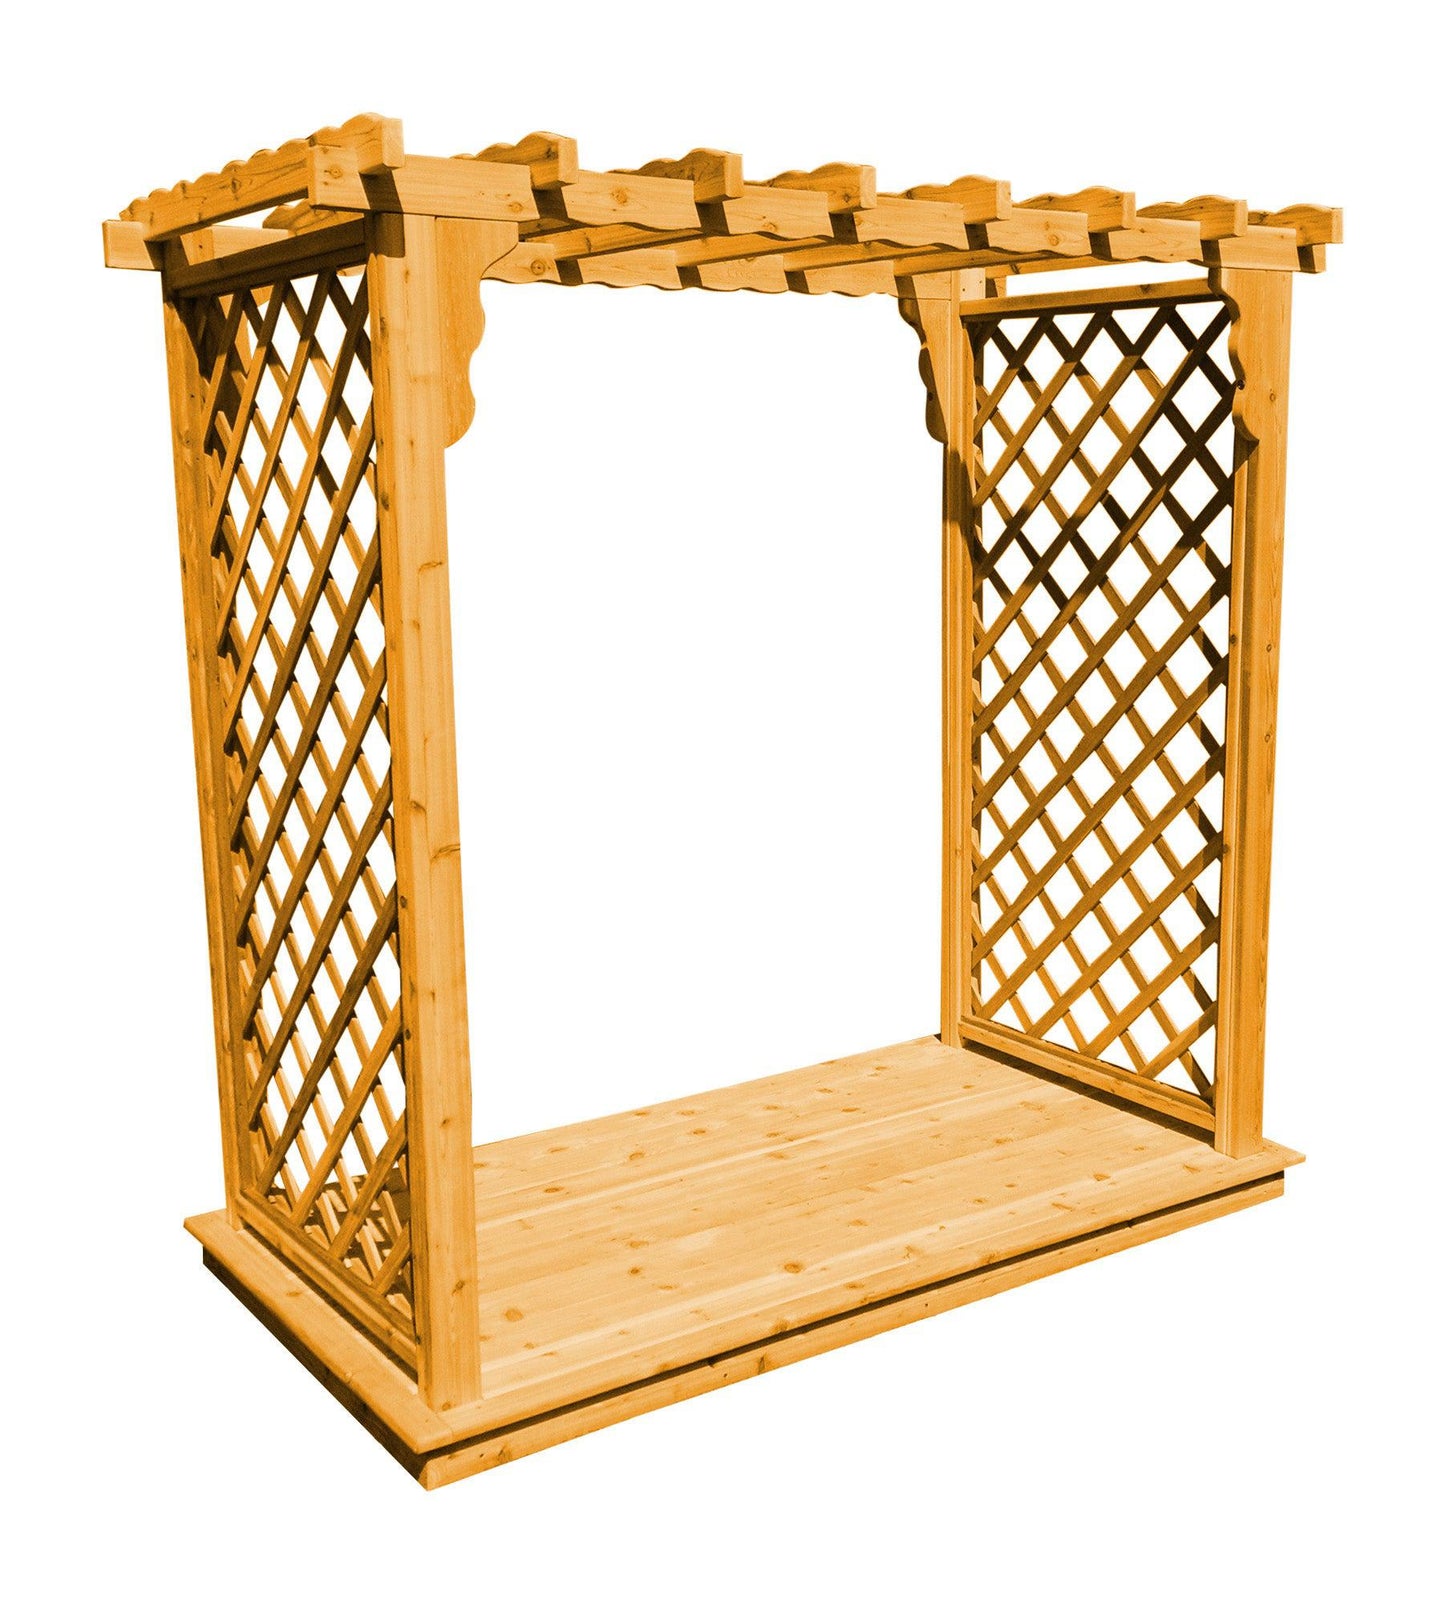 A&L Furniture Co. Western Red Cedar 4' Covington Arbor & Deck - LEAD TIME TO SHIP 4 WEEKS OR LESS